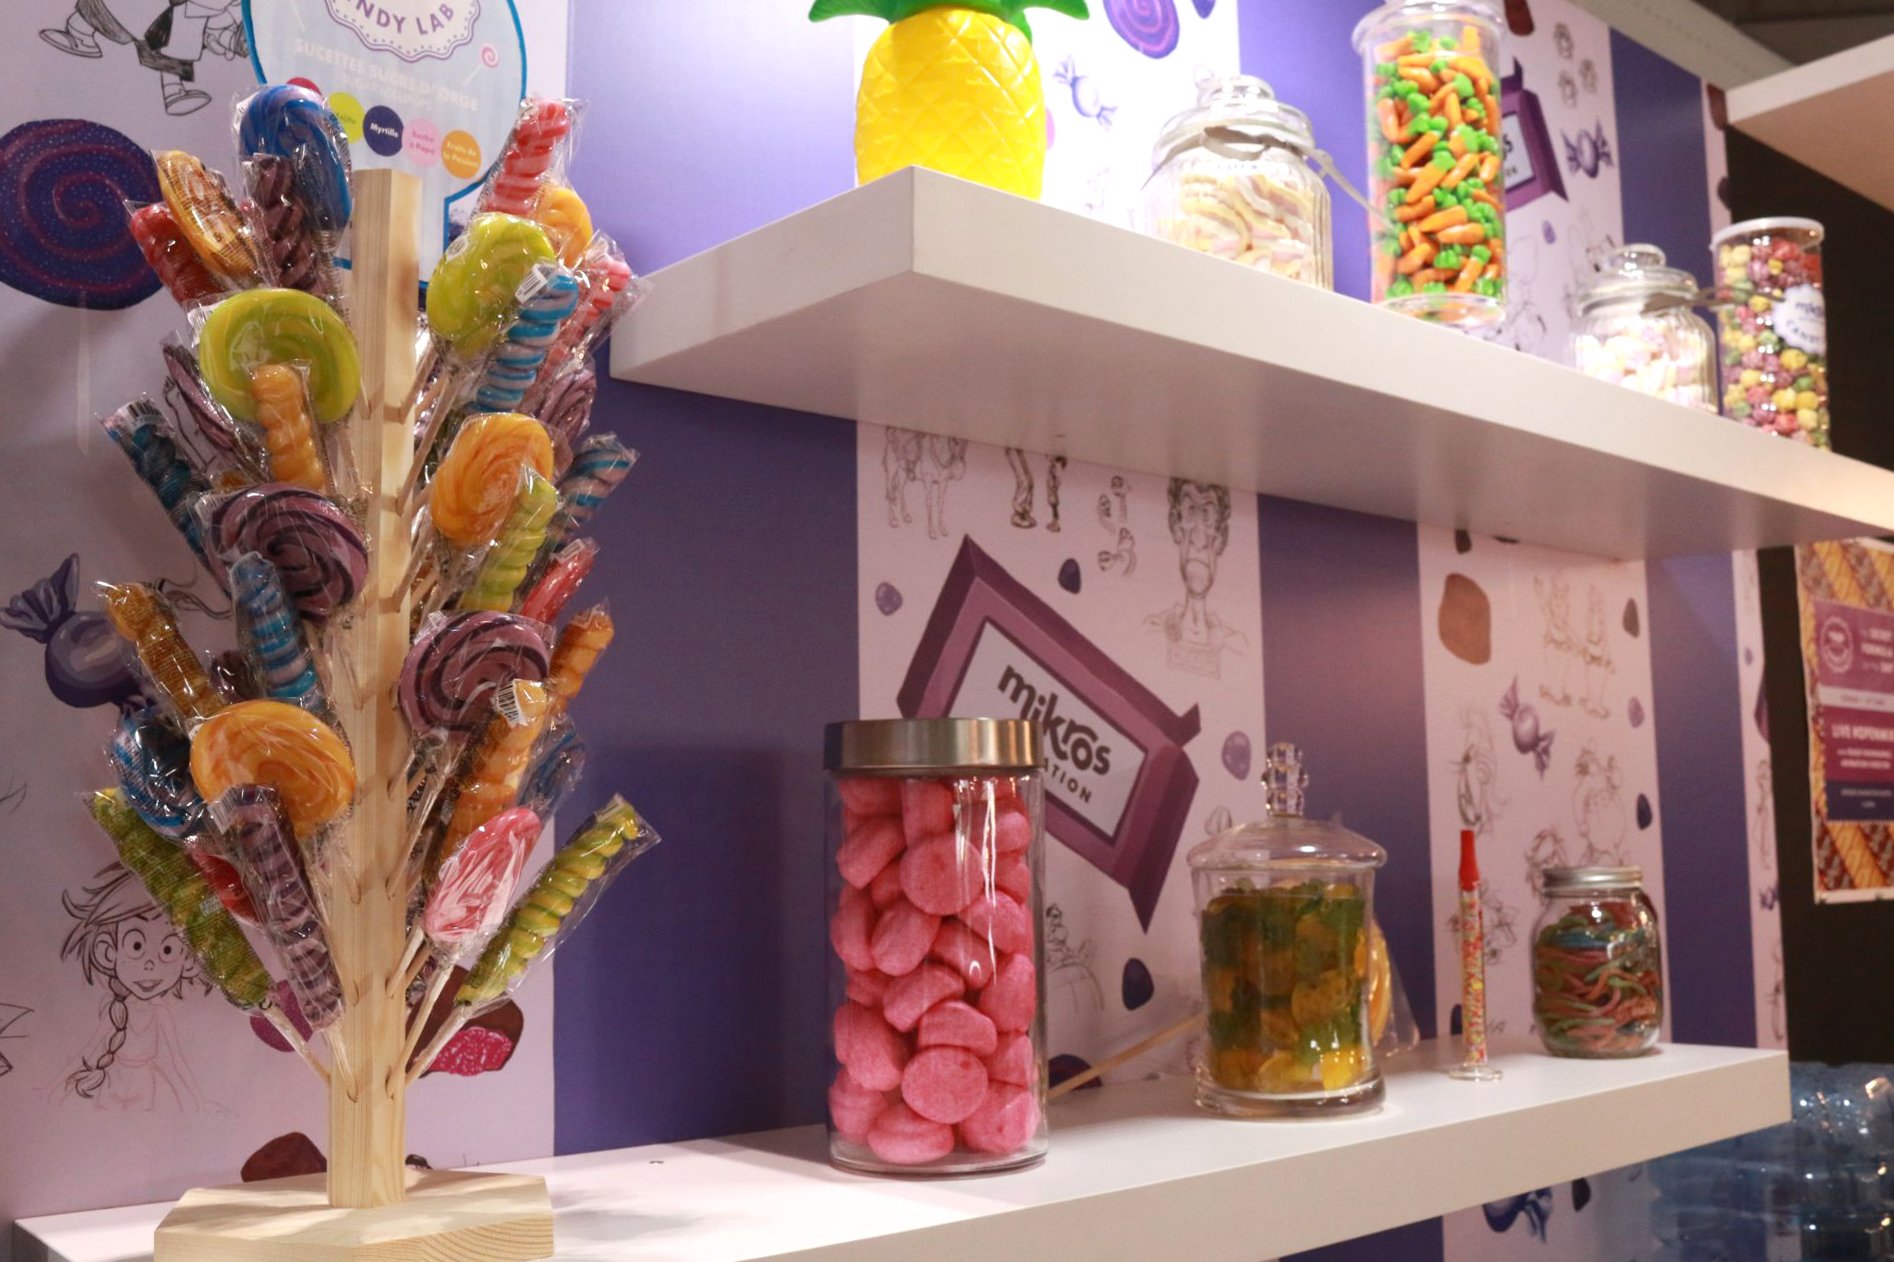 MIKROS_CandyLab-Booth-9.jpg